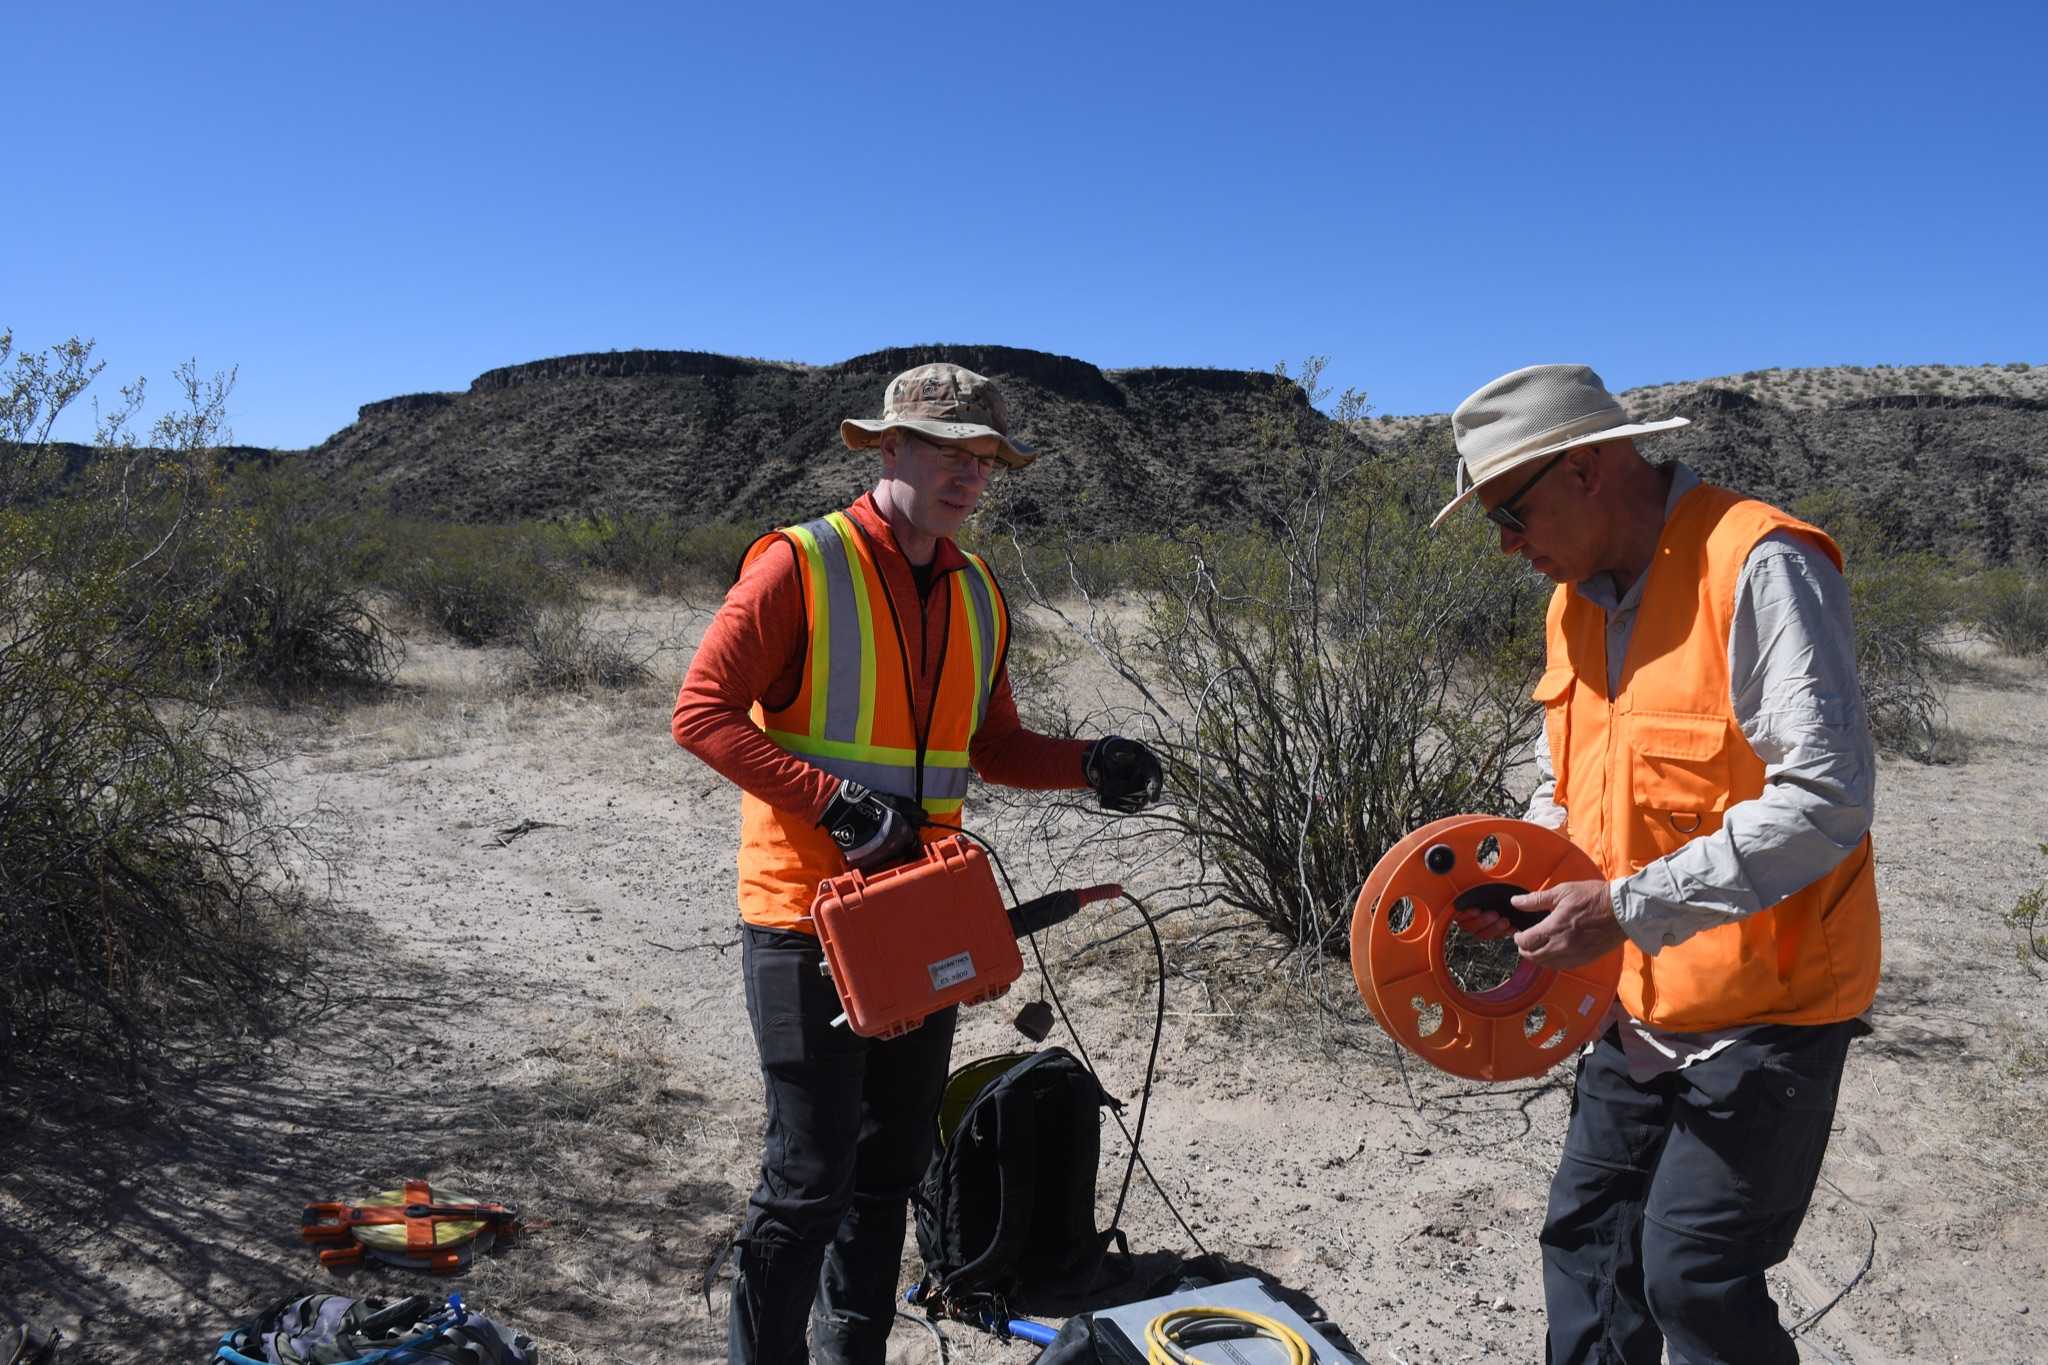 Ernie Bell (left) and John West (right) setting up geophones within the volcanic crater.